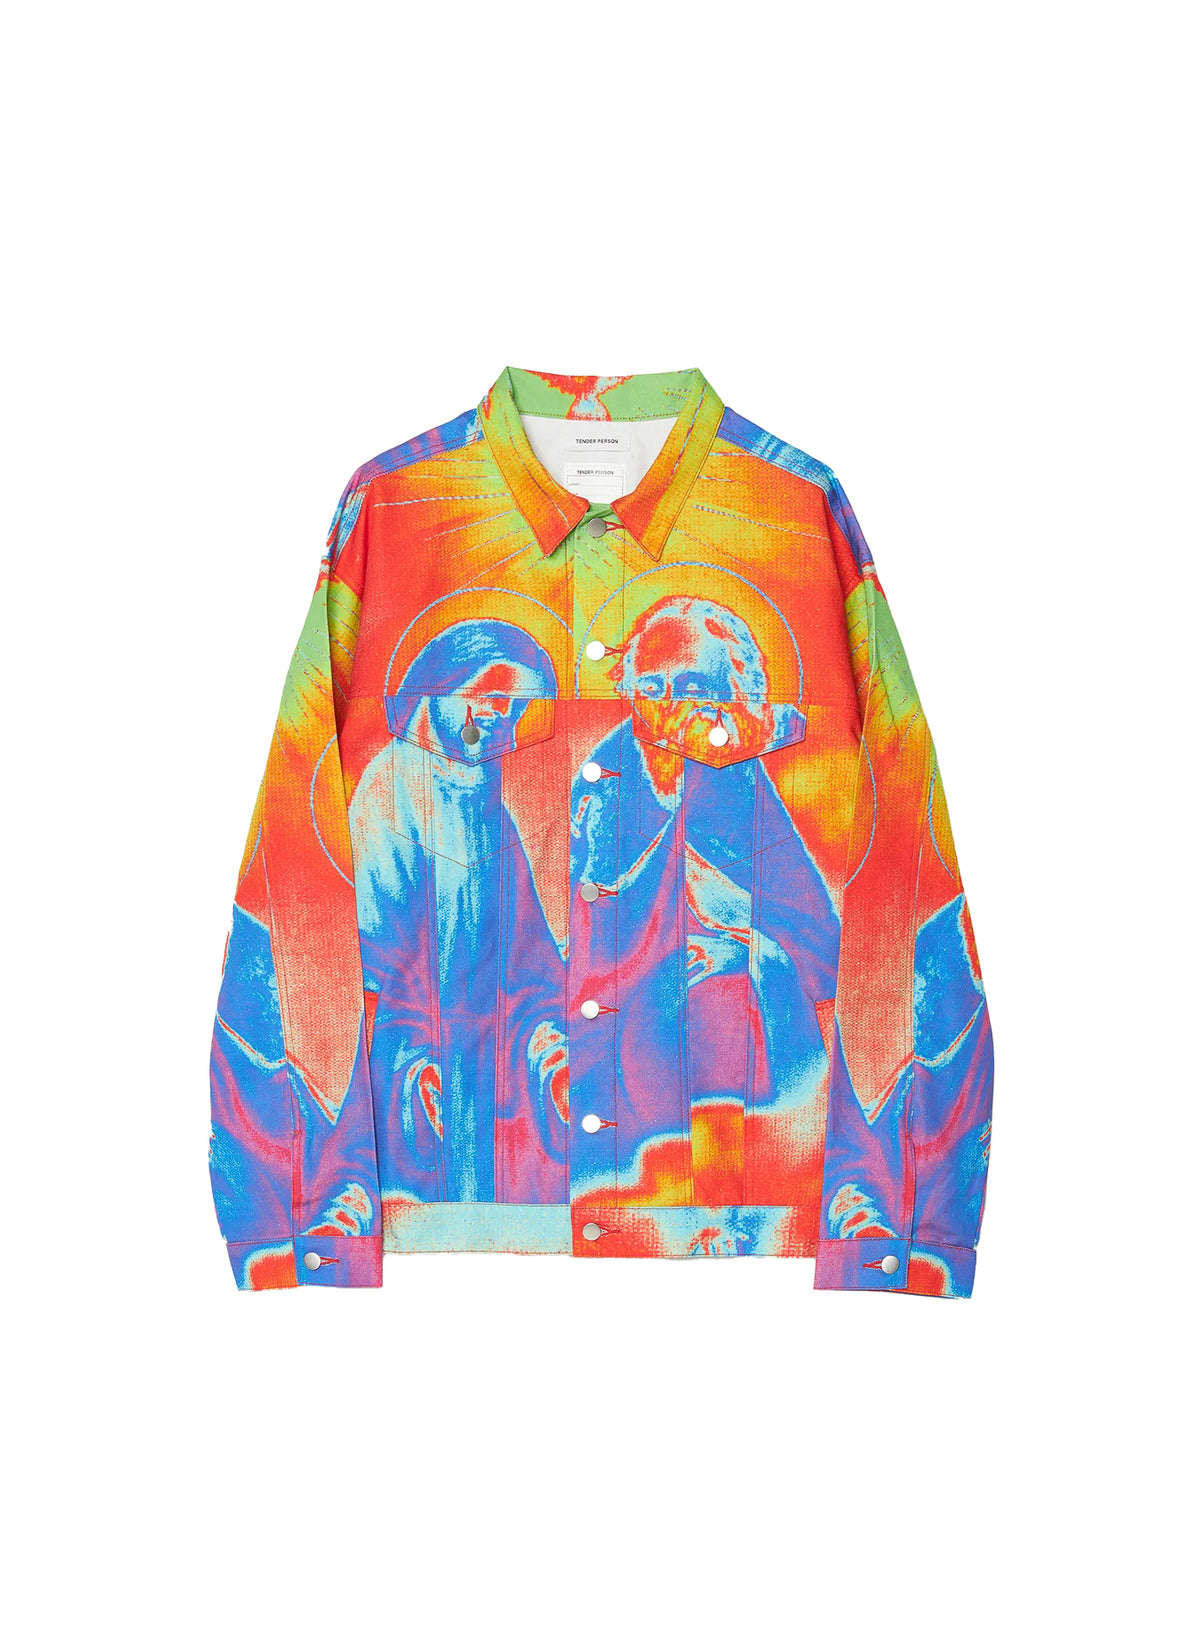 TENDER PERSON / ANGEL DENIM JACKET THERMOGRAPHY